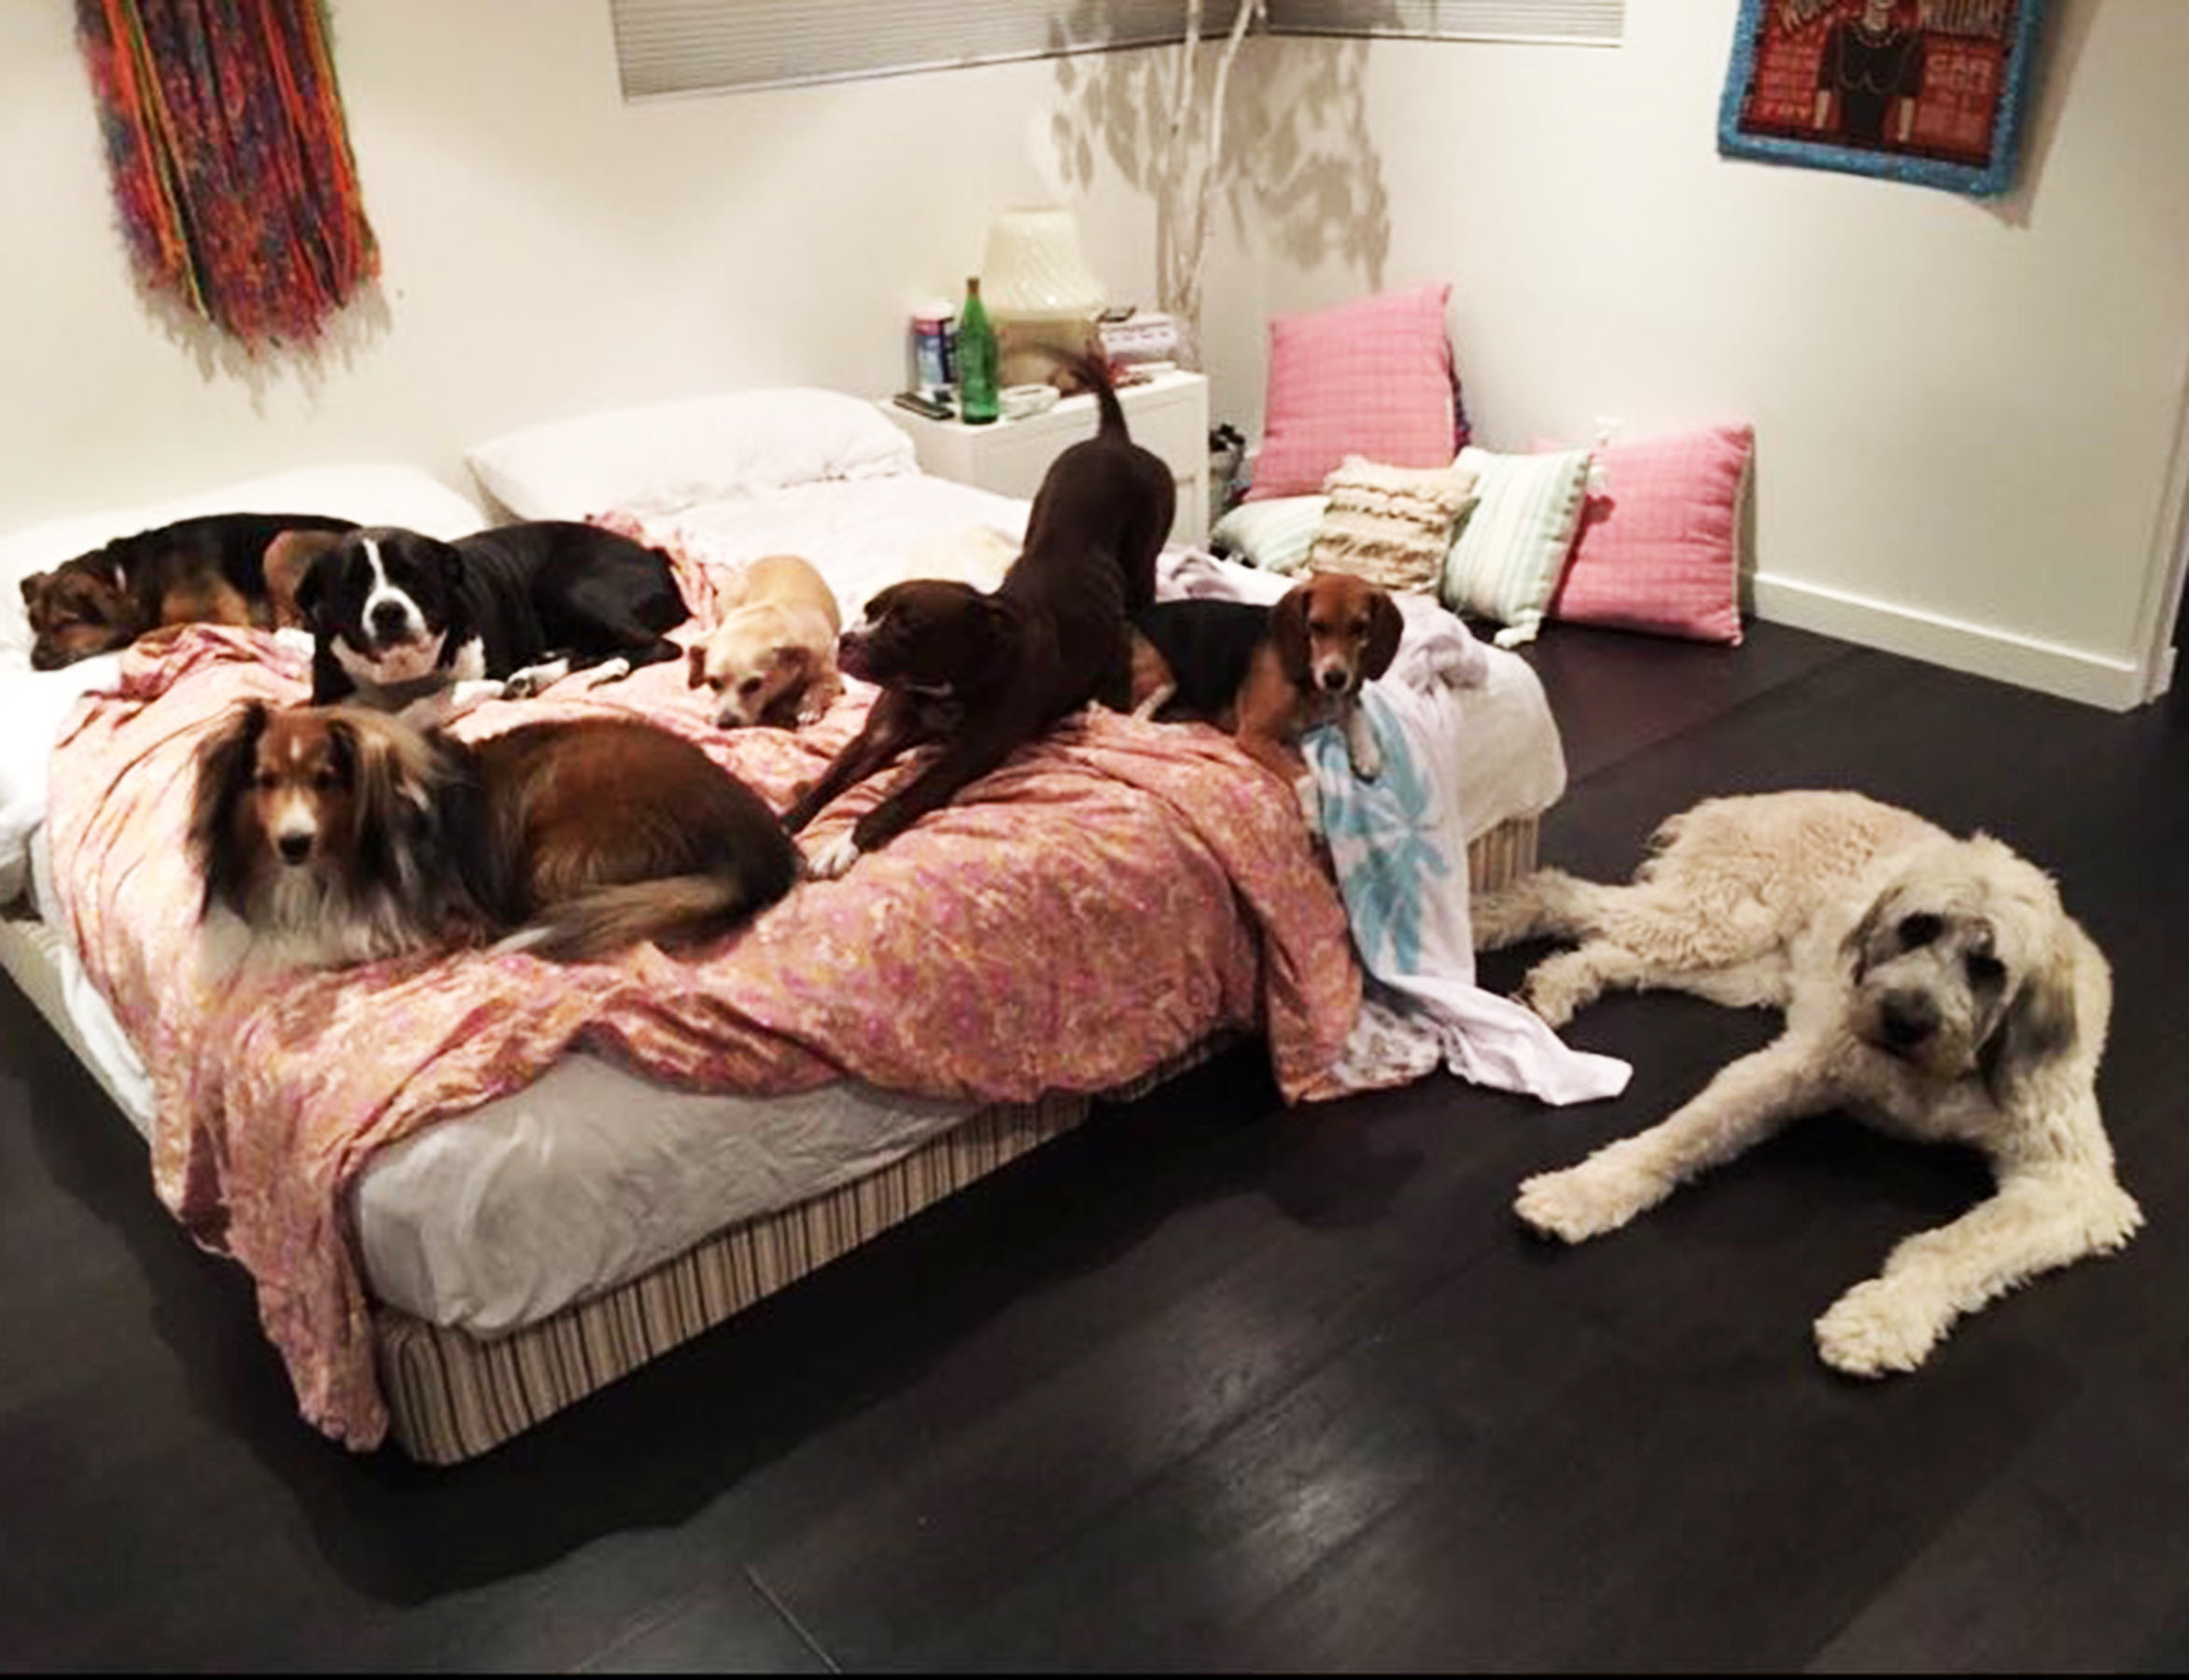 Miley Cyrus Shares Adorable Photo of Her Pets in Bed